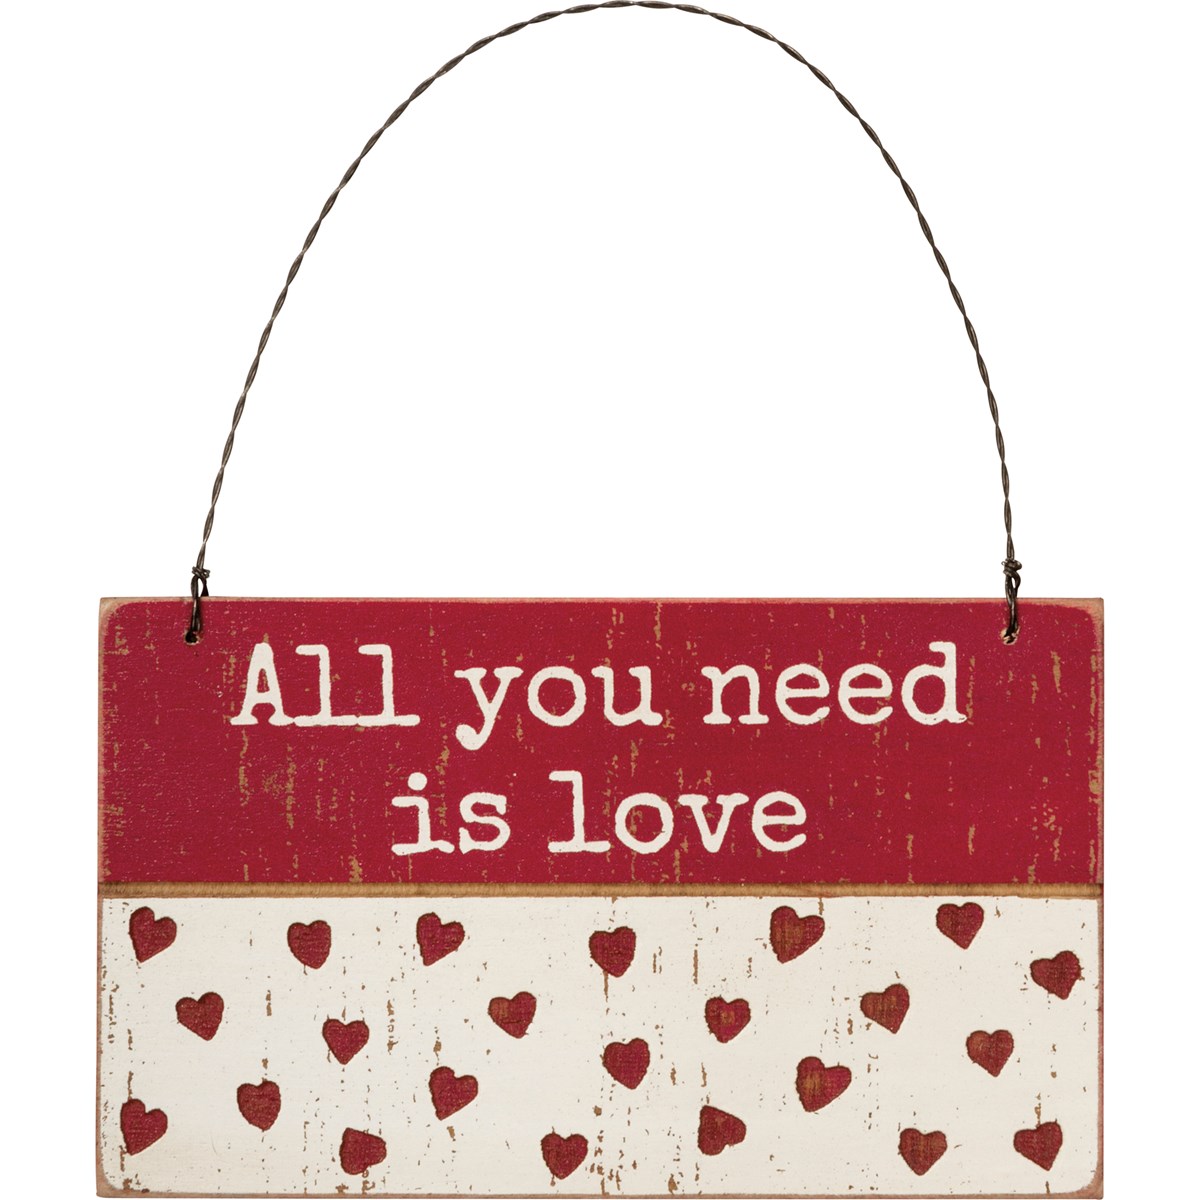 Slat Ornament - All You Need Is Love - 5" x 3" x 0.25" - Wood, Wire